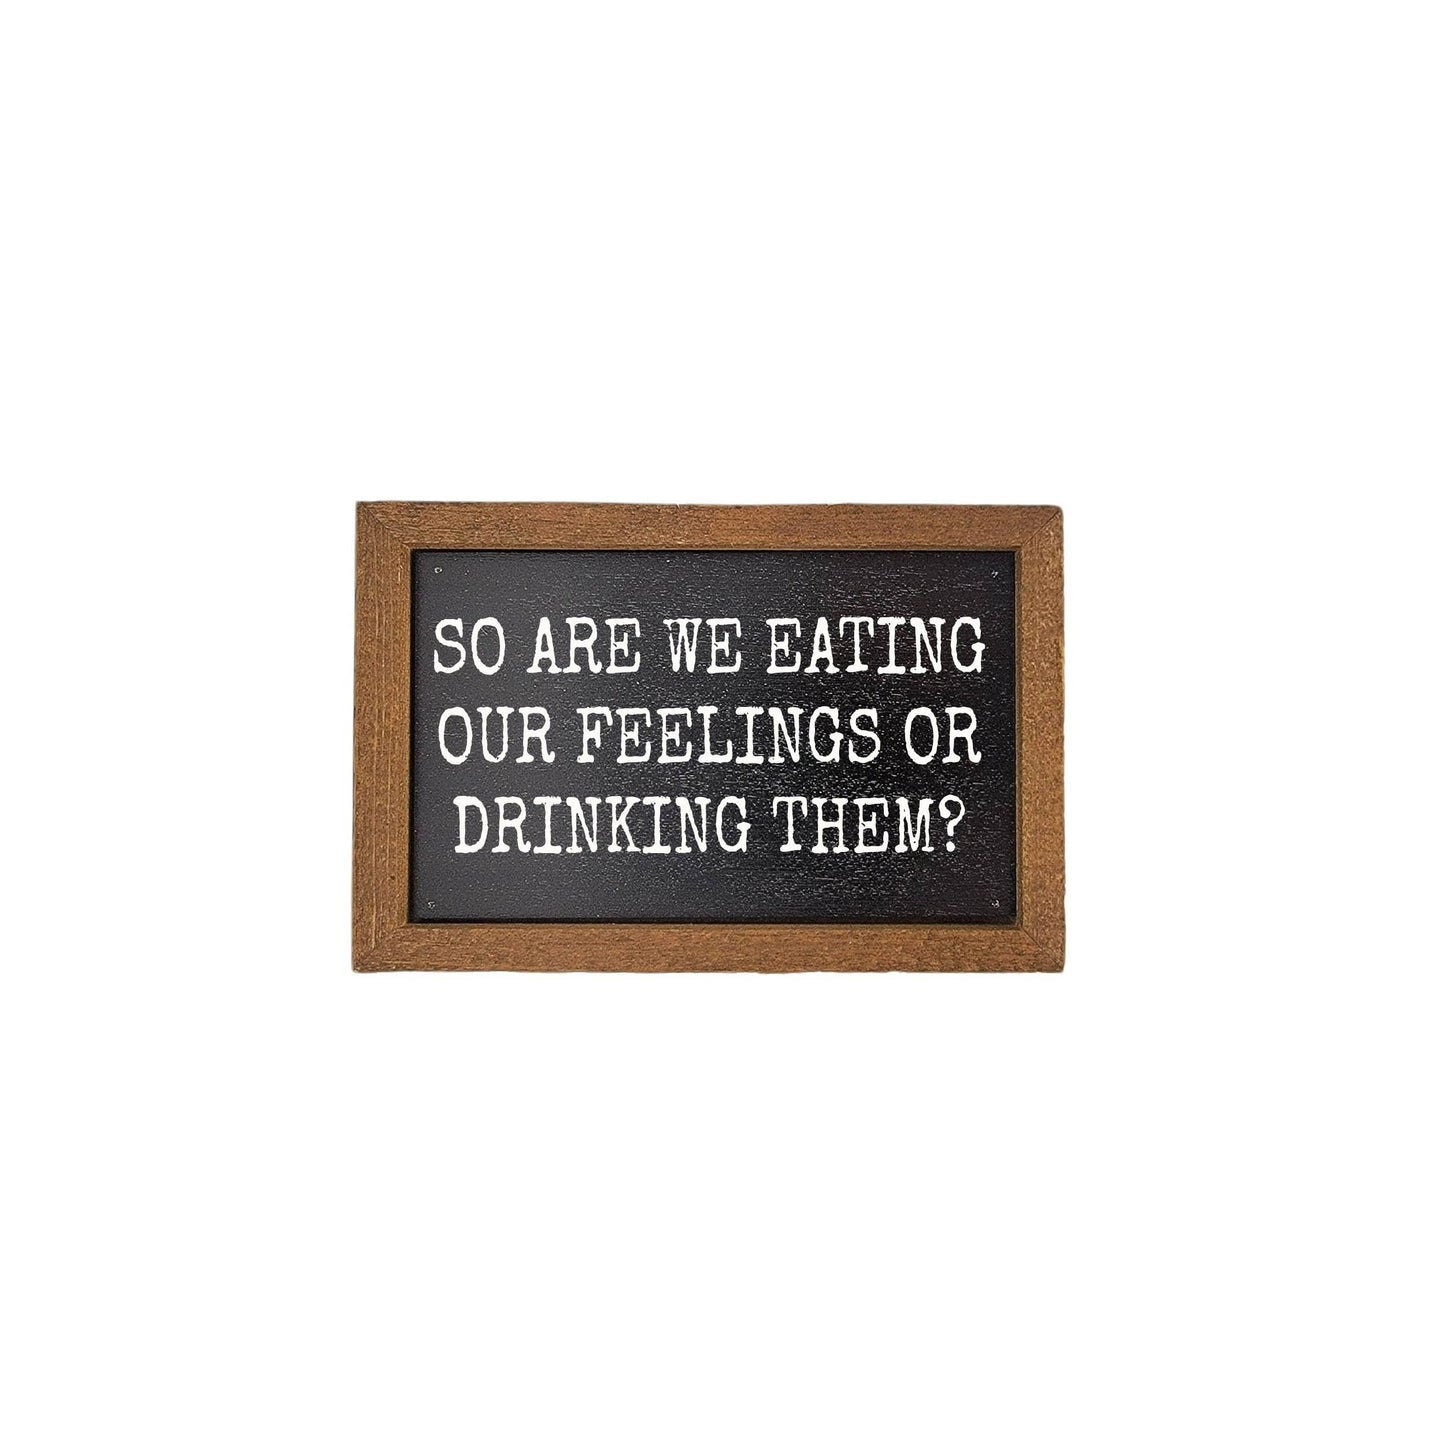 Wooden Sign that is both rustic and modern enough to fit with any decor. All our signs are build into a wooden box frame with a rustic touch. Signs are hung directly off the frame or will stand up right on a table or shelf.